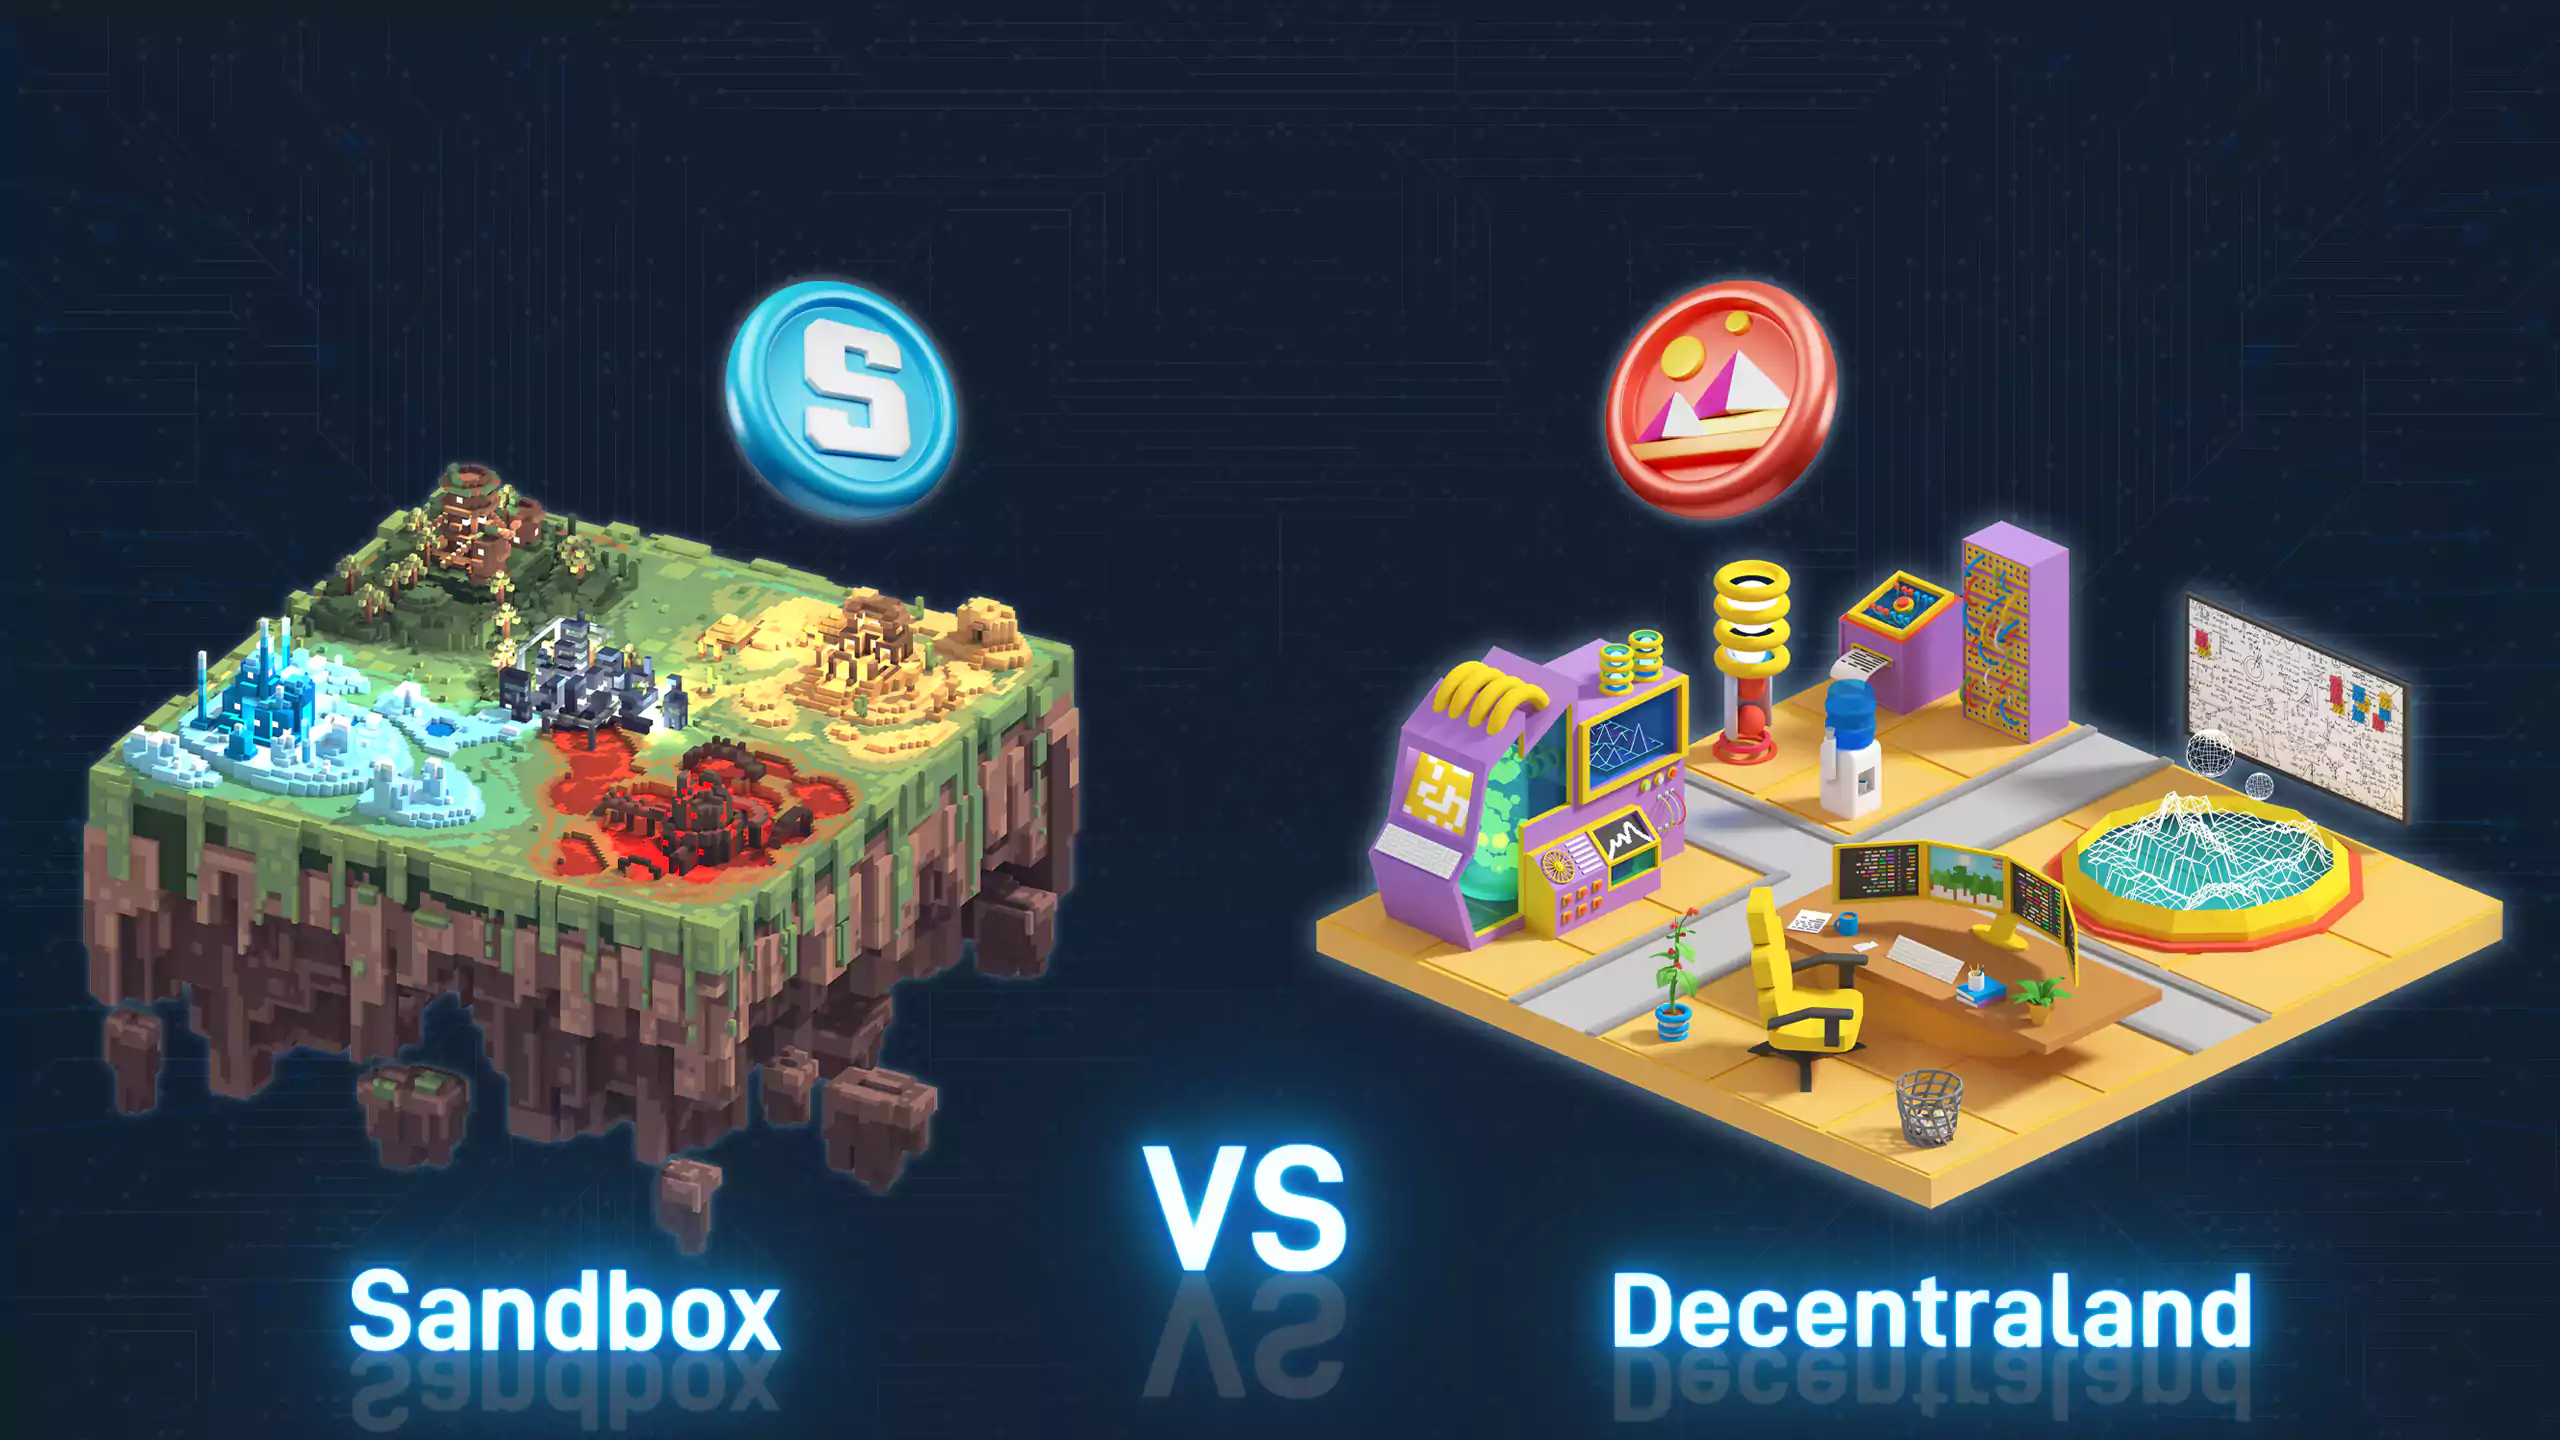 The Sandbox vs Decentraland: Which is the Better Market for Metaverse Real Estate Investing?